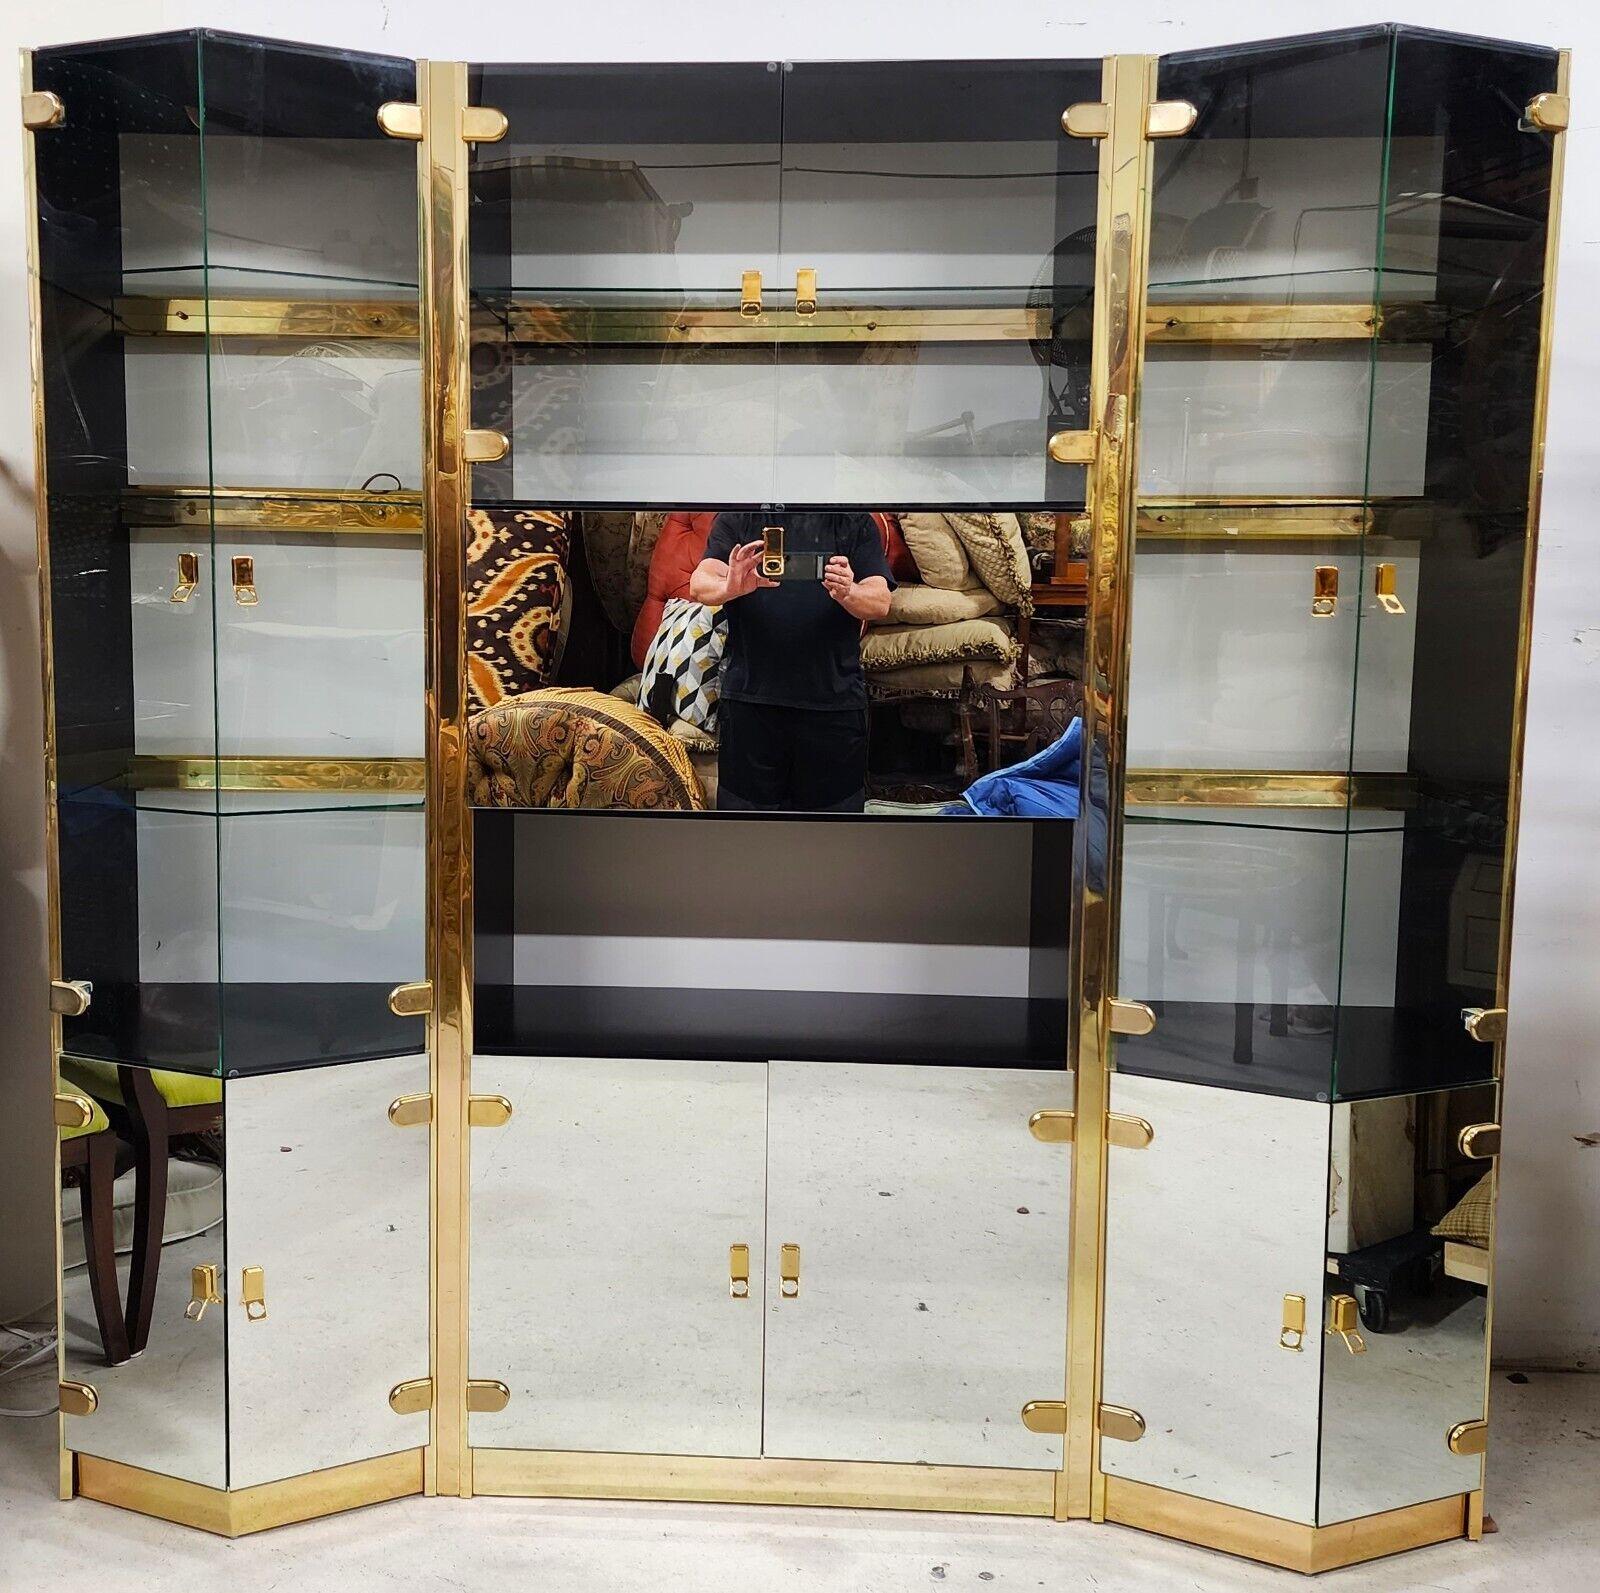 For FULL item description click on CONTINUE READING at the bottom of this page.

Offering One Of Our Recent Palm Beach Estate Fine Furniture Acquisitions Of A

Vintage 1970s wall display cabinet with dry bar

This is one of the most perfectly